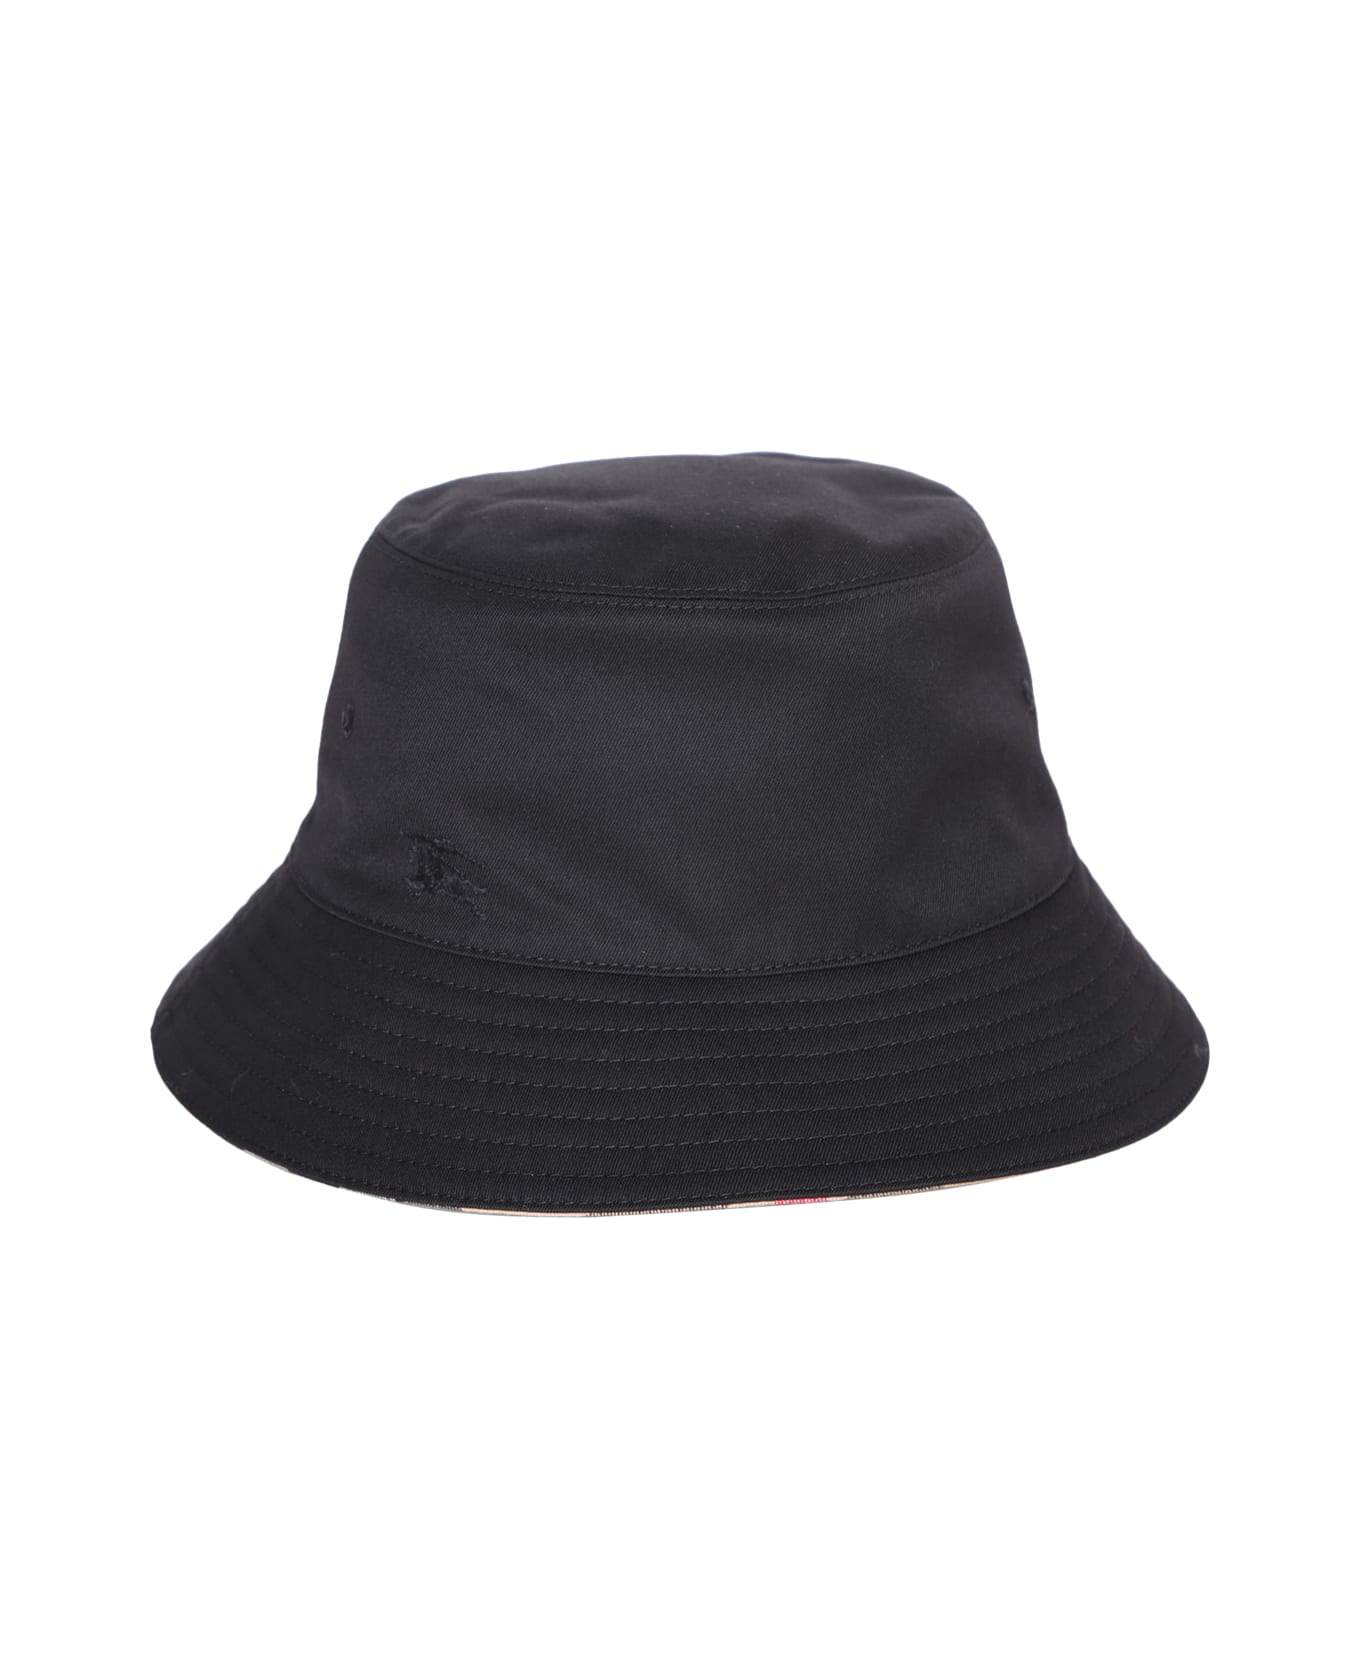 Burberry Checked Reversible Bucket Hat - Black